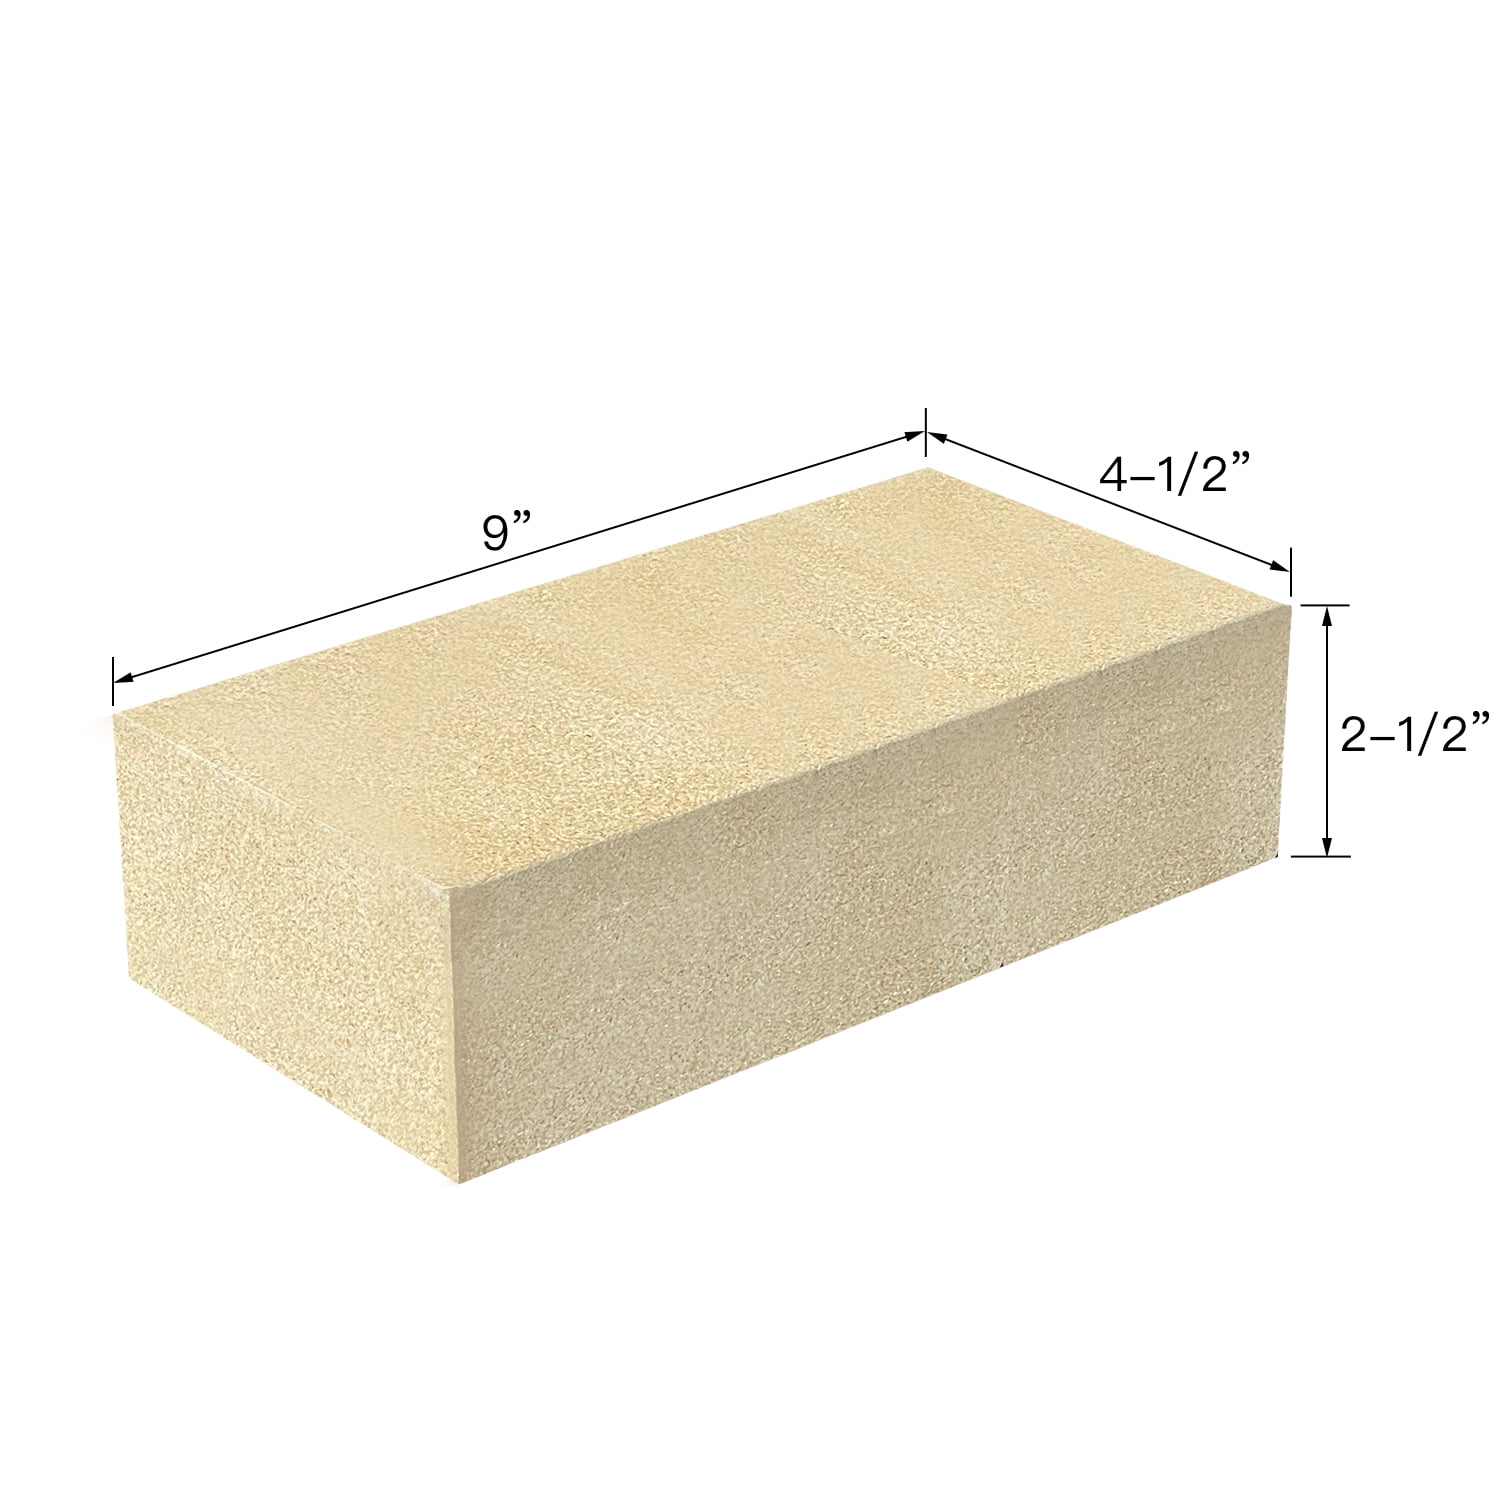 Fire Bricks, Woodstove Firebricks, Size 9″ x 4-1/2″ x 2-1/2″, 2-Pack,  Insulating Fire Bricks, 2.5 Thick Clay Firebricks Replacement for Wood  Stoves, Fireplaces, Fire Pit, Kiln, Pizza Oven - Yahoo Shopping